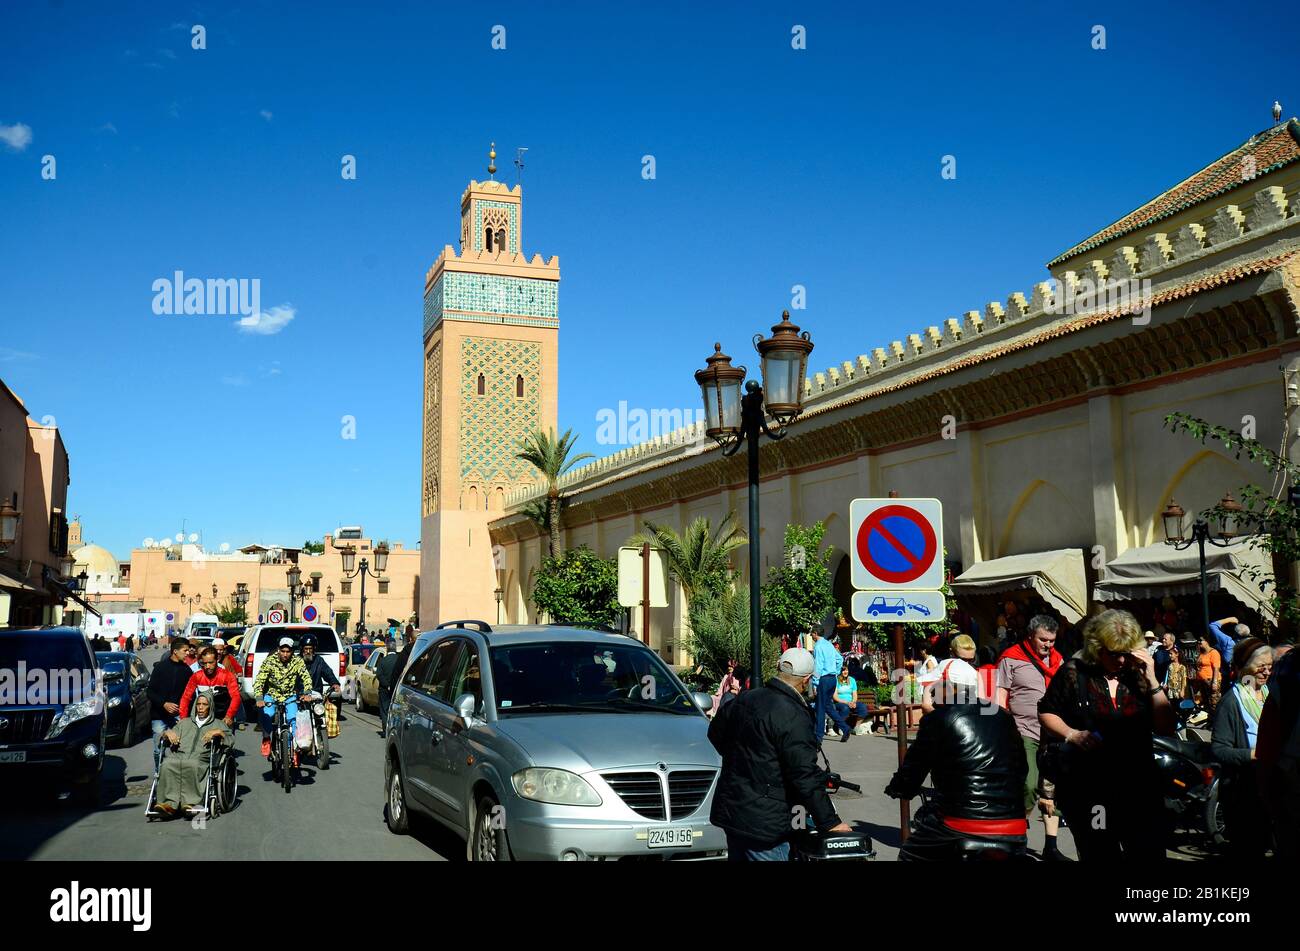 Marrakesh, Morocco - November 22nd 2014: Unidentified people with bike, bicycle and invalid chair, mosque with minaret in traditional structure Stock Photo